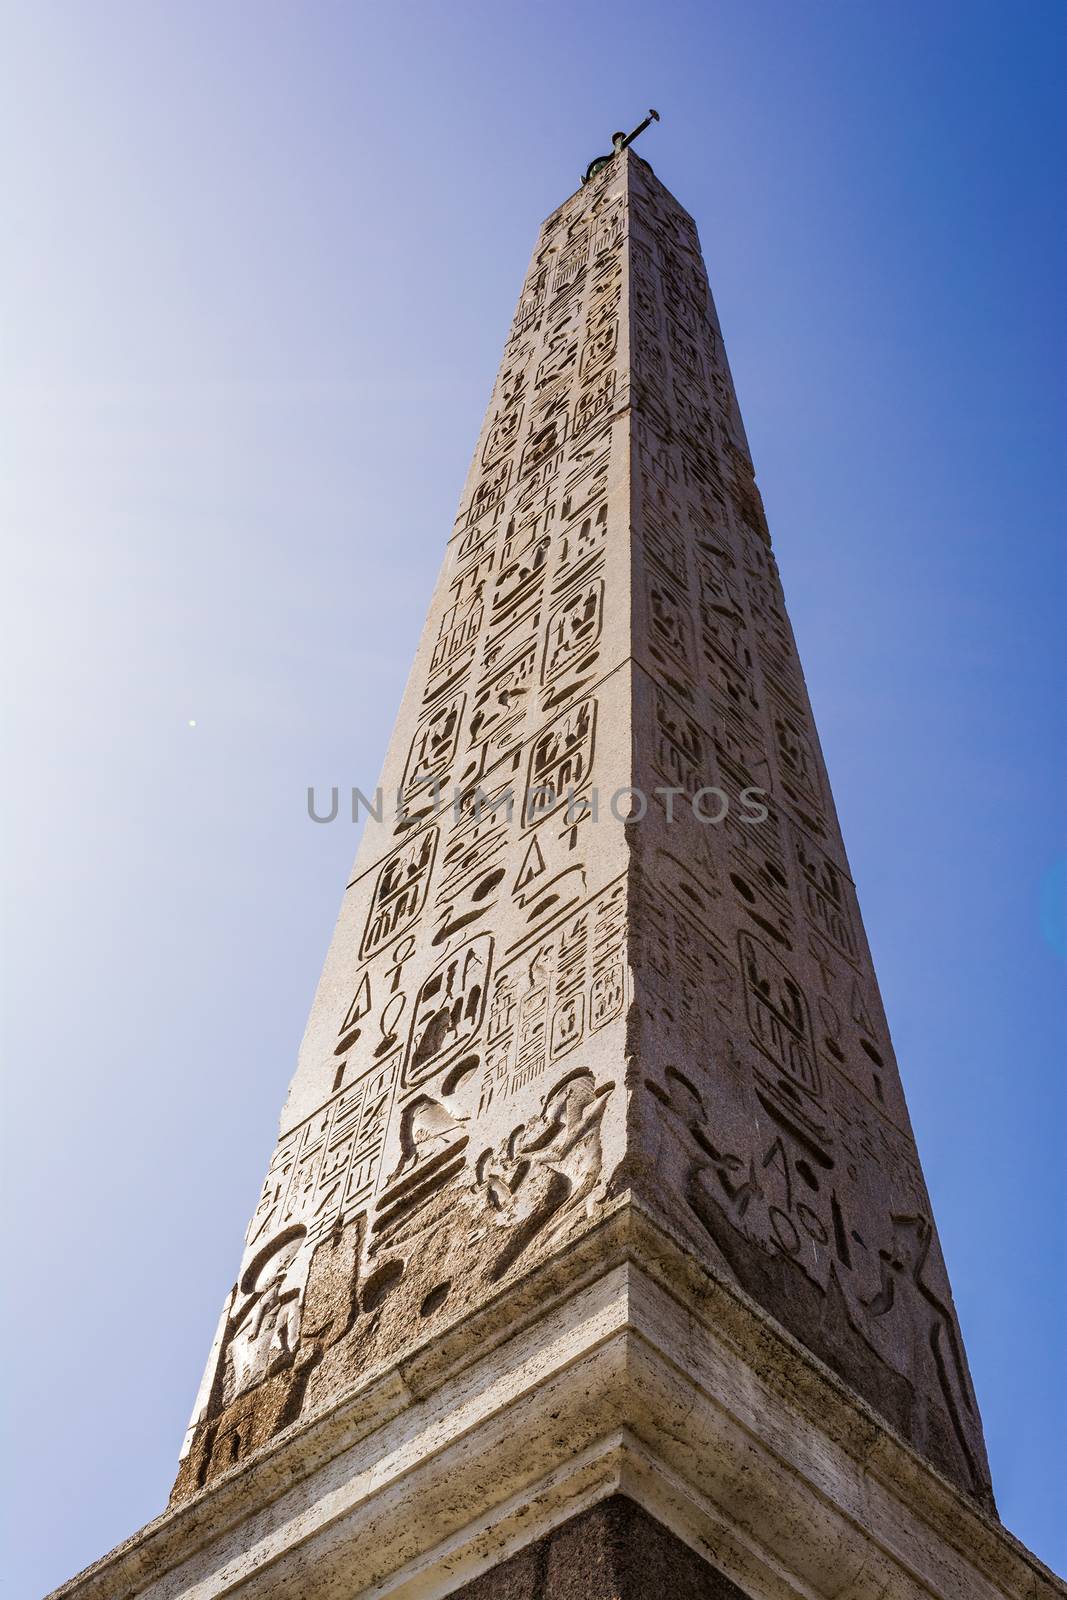 Obelisk in Piazza del Popolo, Rome. An Egyptian obelisk stands in the centre of the Piazza. Three sides of the obelisk were carved during the reign of Sety I and the fourth side, under Rameses II.